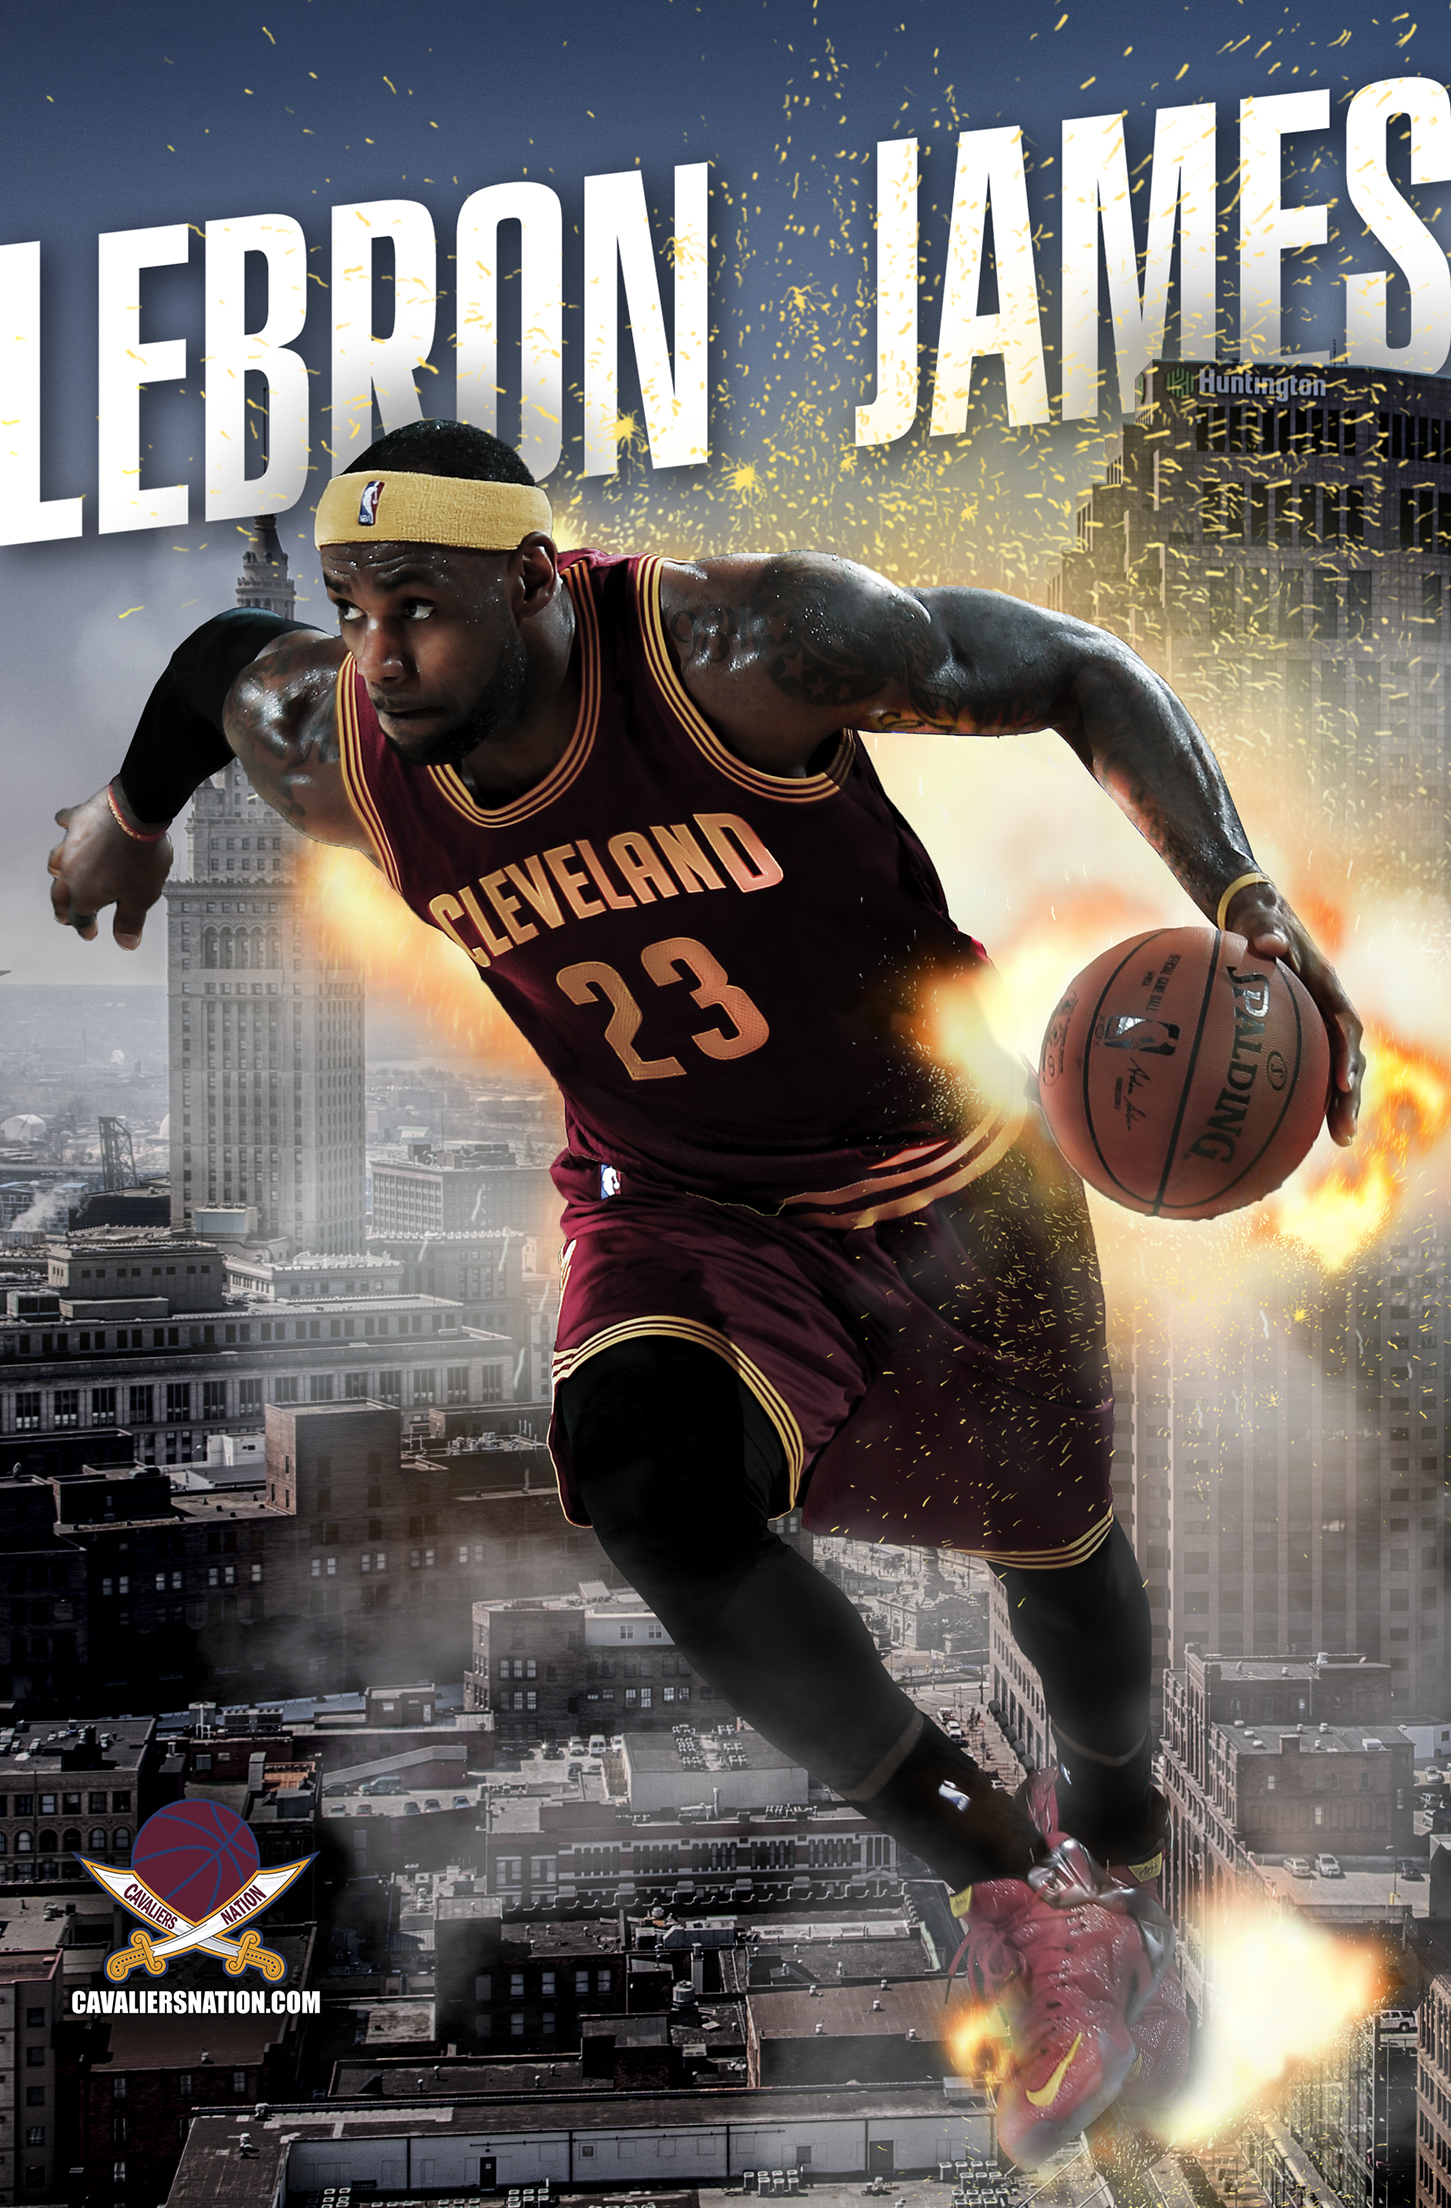 Lebron James Mvp Wallpapers 2018 71 pictures